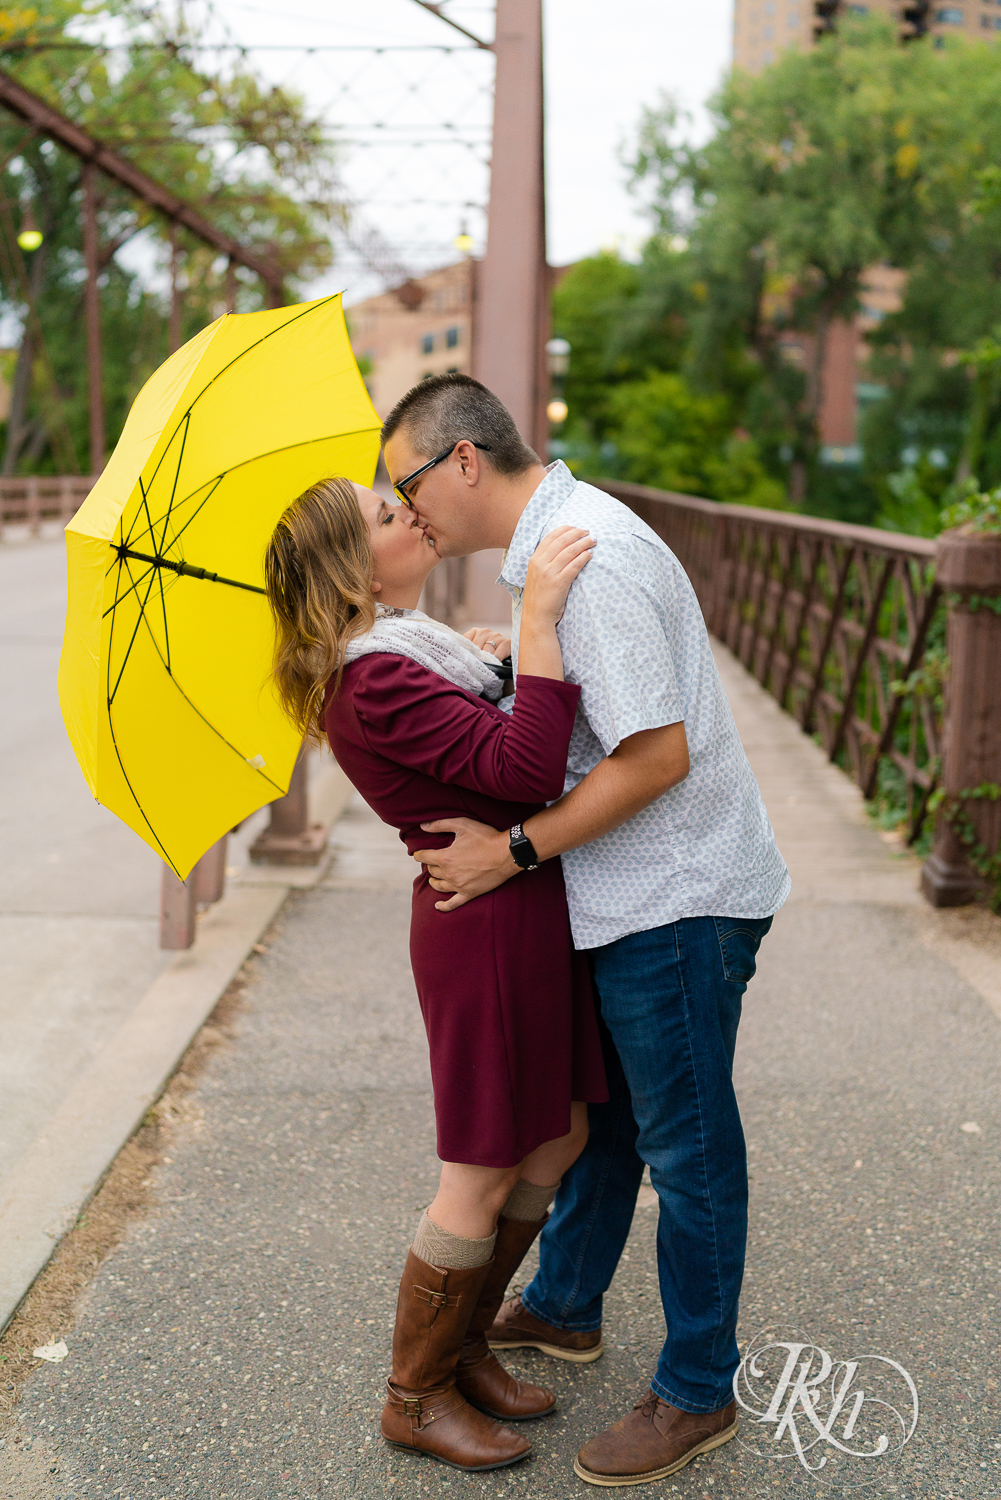 Man in glasses and woman is red dress and scarf kissing and holding umbrella on bridge in Minneapolis, Minnesota.